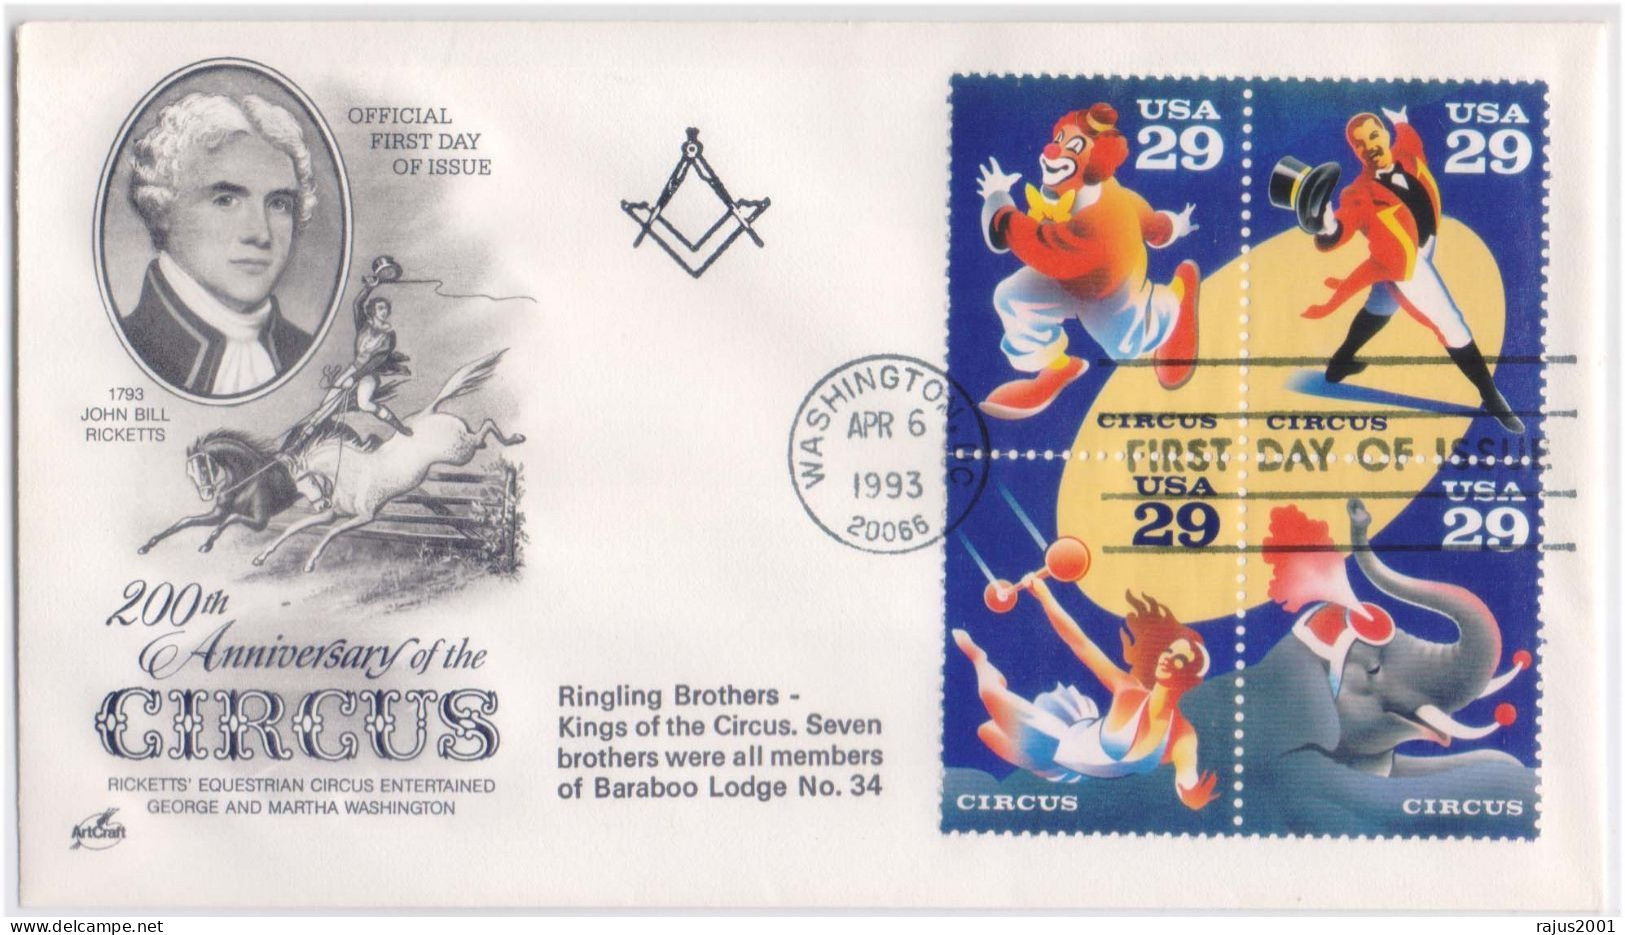 Ringling Brothers Kings Of The Circus. Member Of Baraboo Lodge No. 34, Freemasonry, Masonic Limited Only 90 Cover Issued - Vrijmetselarij